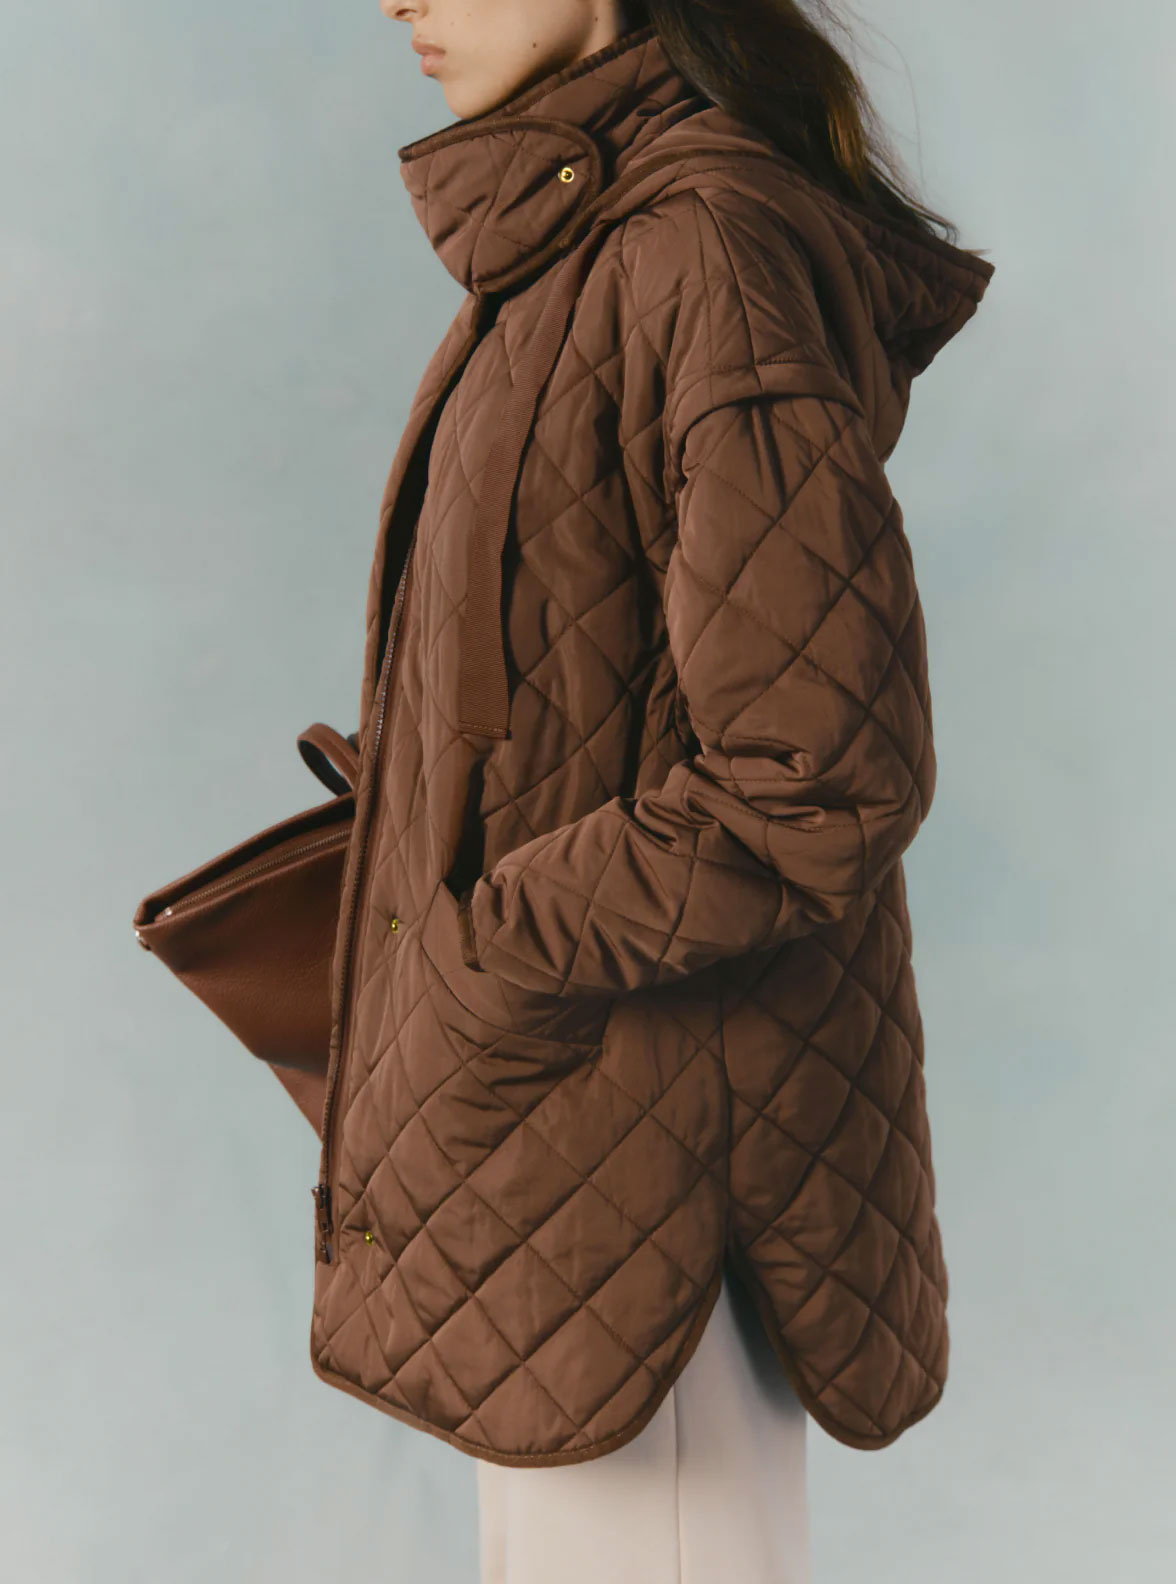 Cuyana brown sustainable puffer jackets for fall